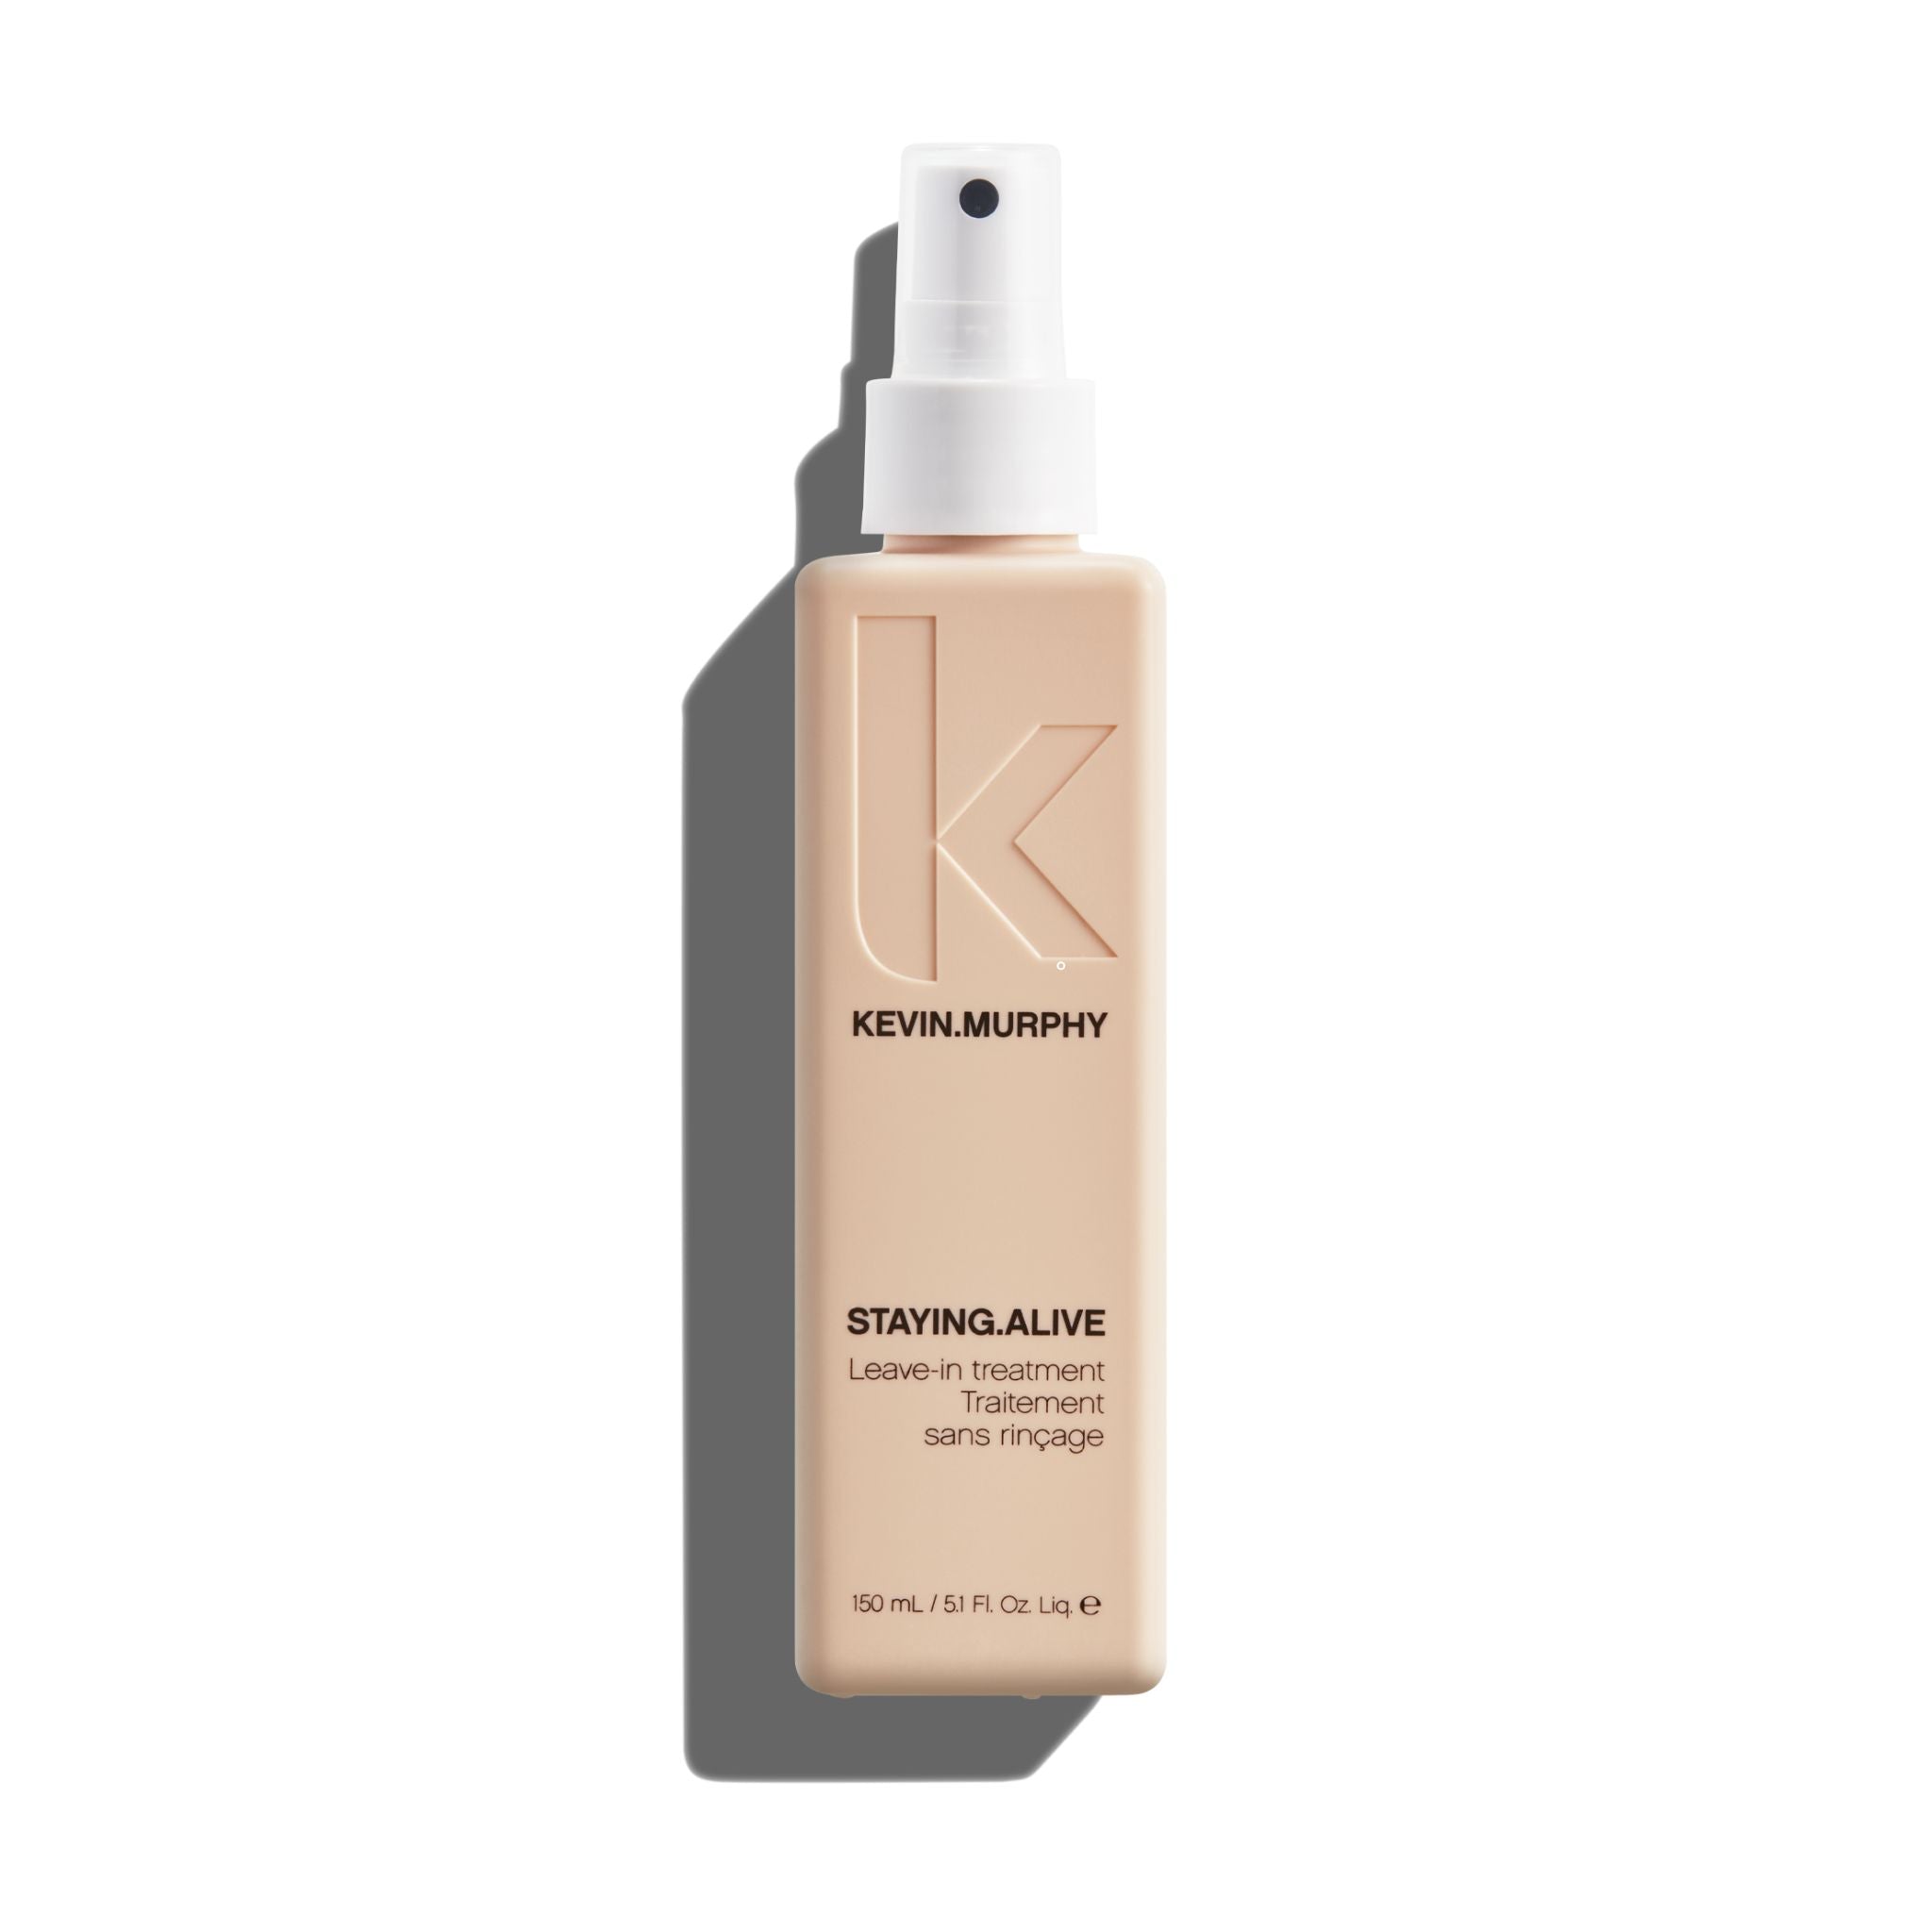 Kevin Murphy - Staying Alive 150ml